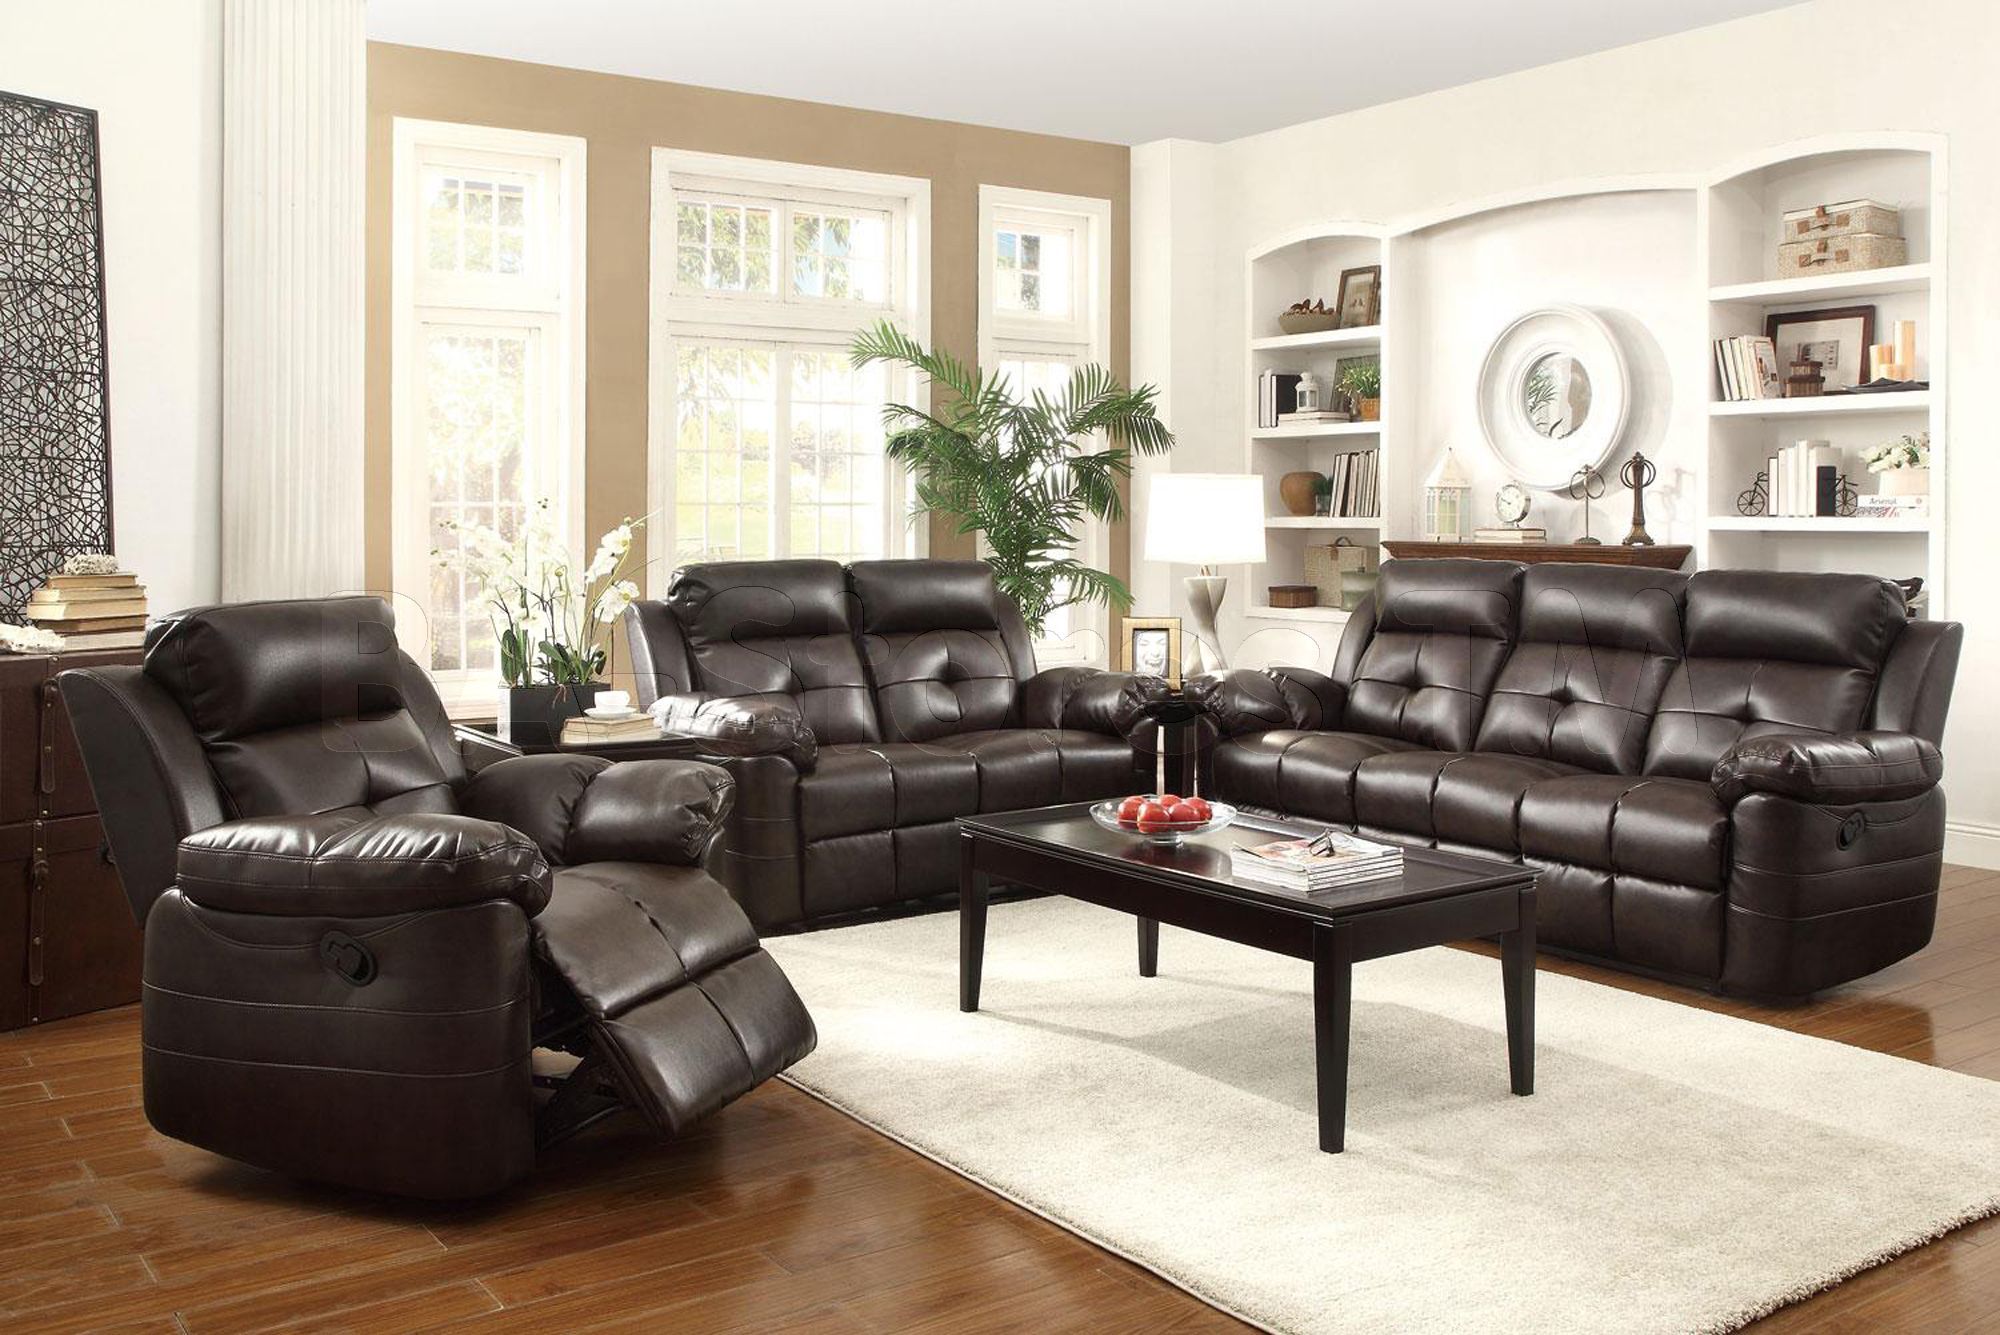 Keating Dark Brown Bonded Leather Match 3 Pc Motion Sofa With Regard To 3pc Bonded Leather Upholstered Wooden Sectional Sofas Brown (View 15 of 15)